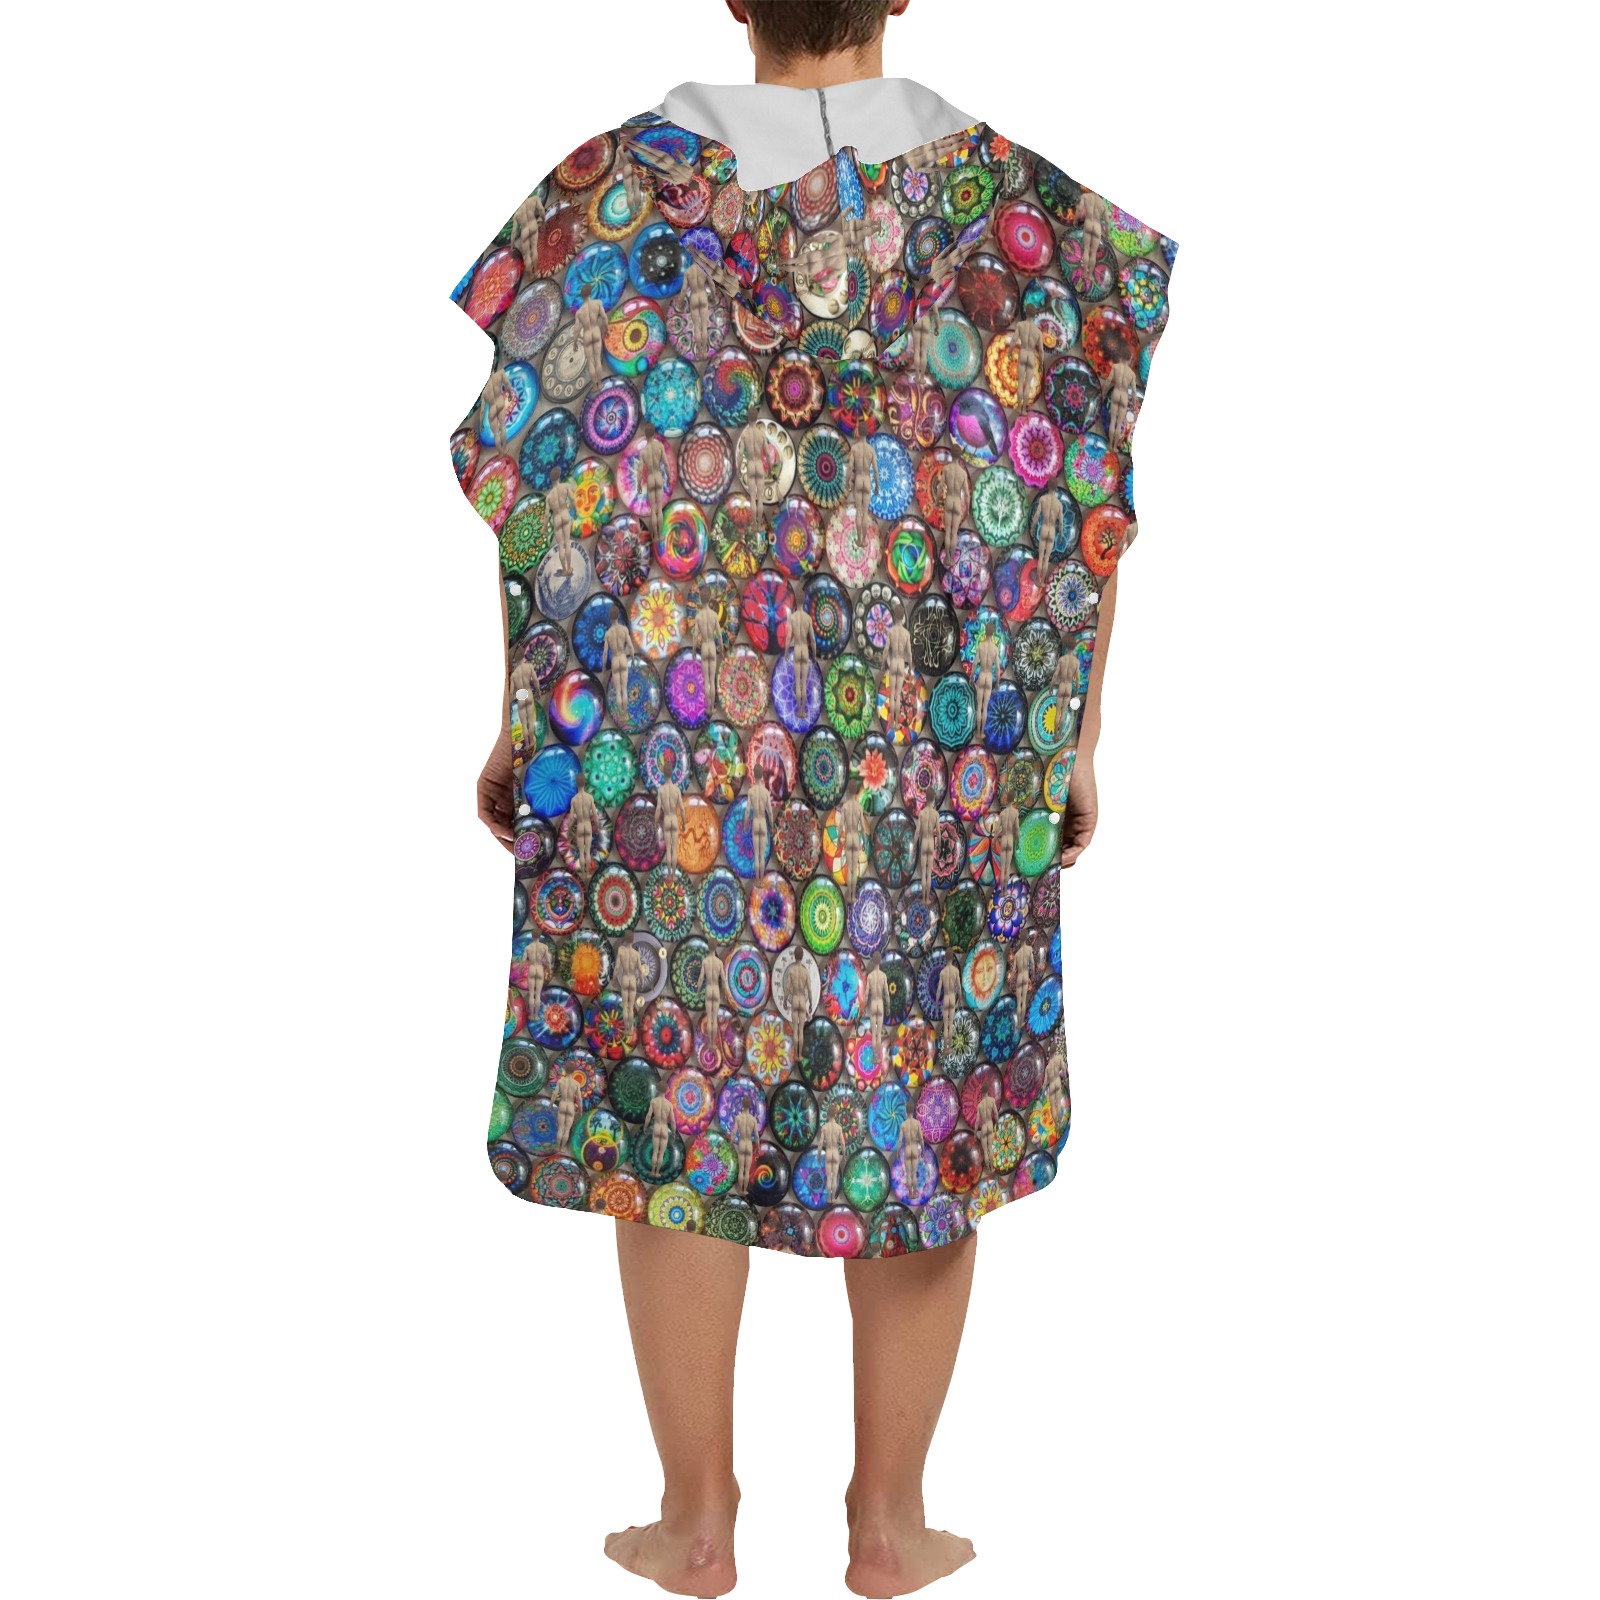 My Little Paperweights Boy Zone Beach Changing Robe (Large Size)